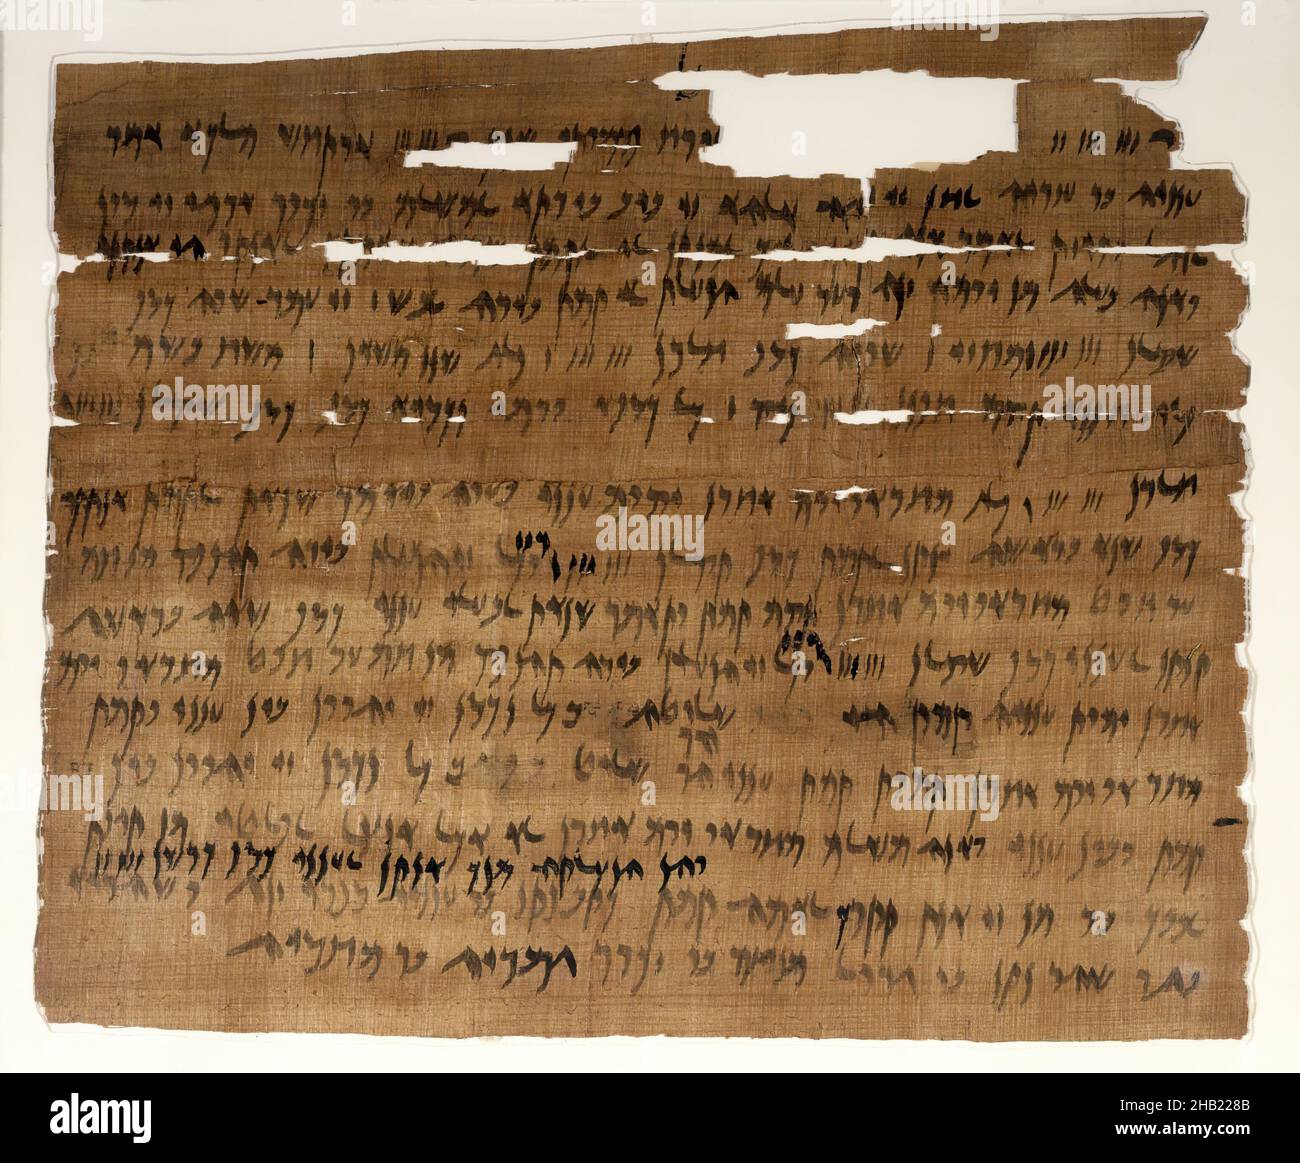 Marriage Document, Aramaic, Papyrus, ink, mud, linen, July 3, 449 B.C.E., Dynasty 27, Persian Period, Glass: 13 1/4 x 14 15/16 in., 33.7 x 38 cm, Aramaic, archaeology, b.c.e., contract, document, Elephantine, family, fragile, History, ink, Jewish, Jewish history, Jewish life, marriage, marriage document, marriage license, paper, papyrus, Persian Period, record, script, text, texts, torn, wedding, writing Stock Photo